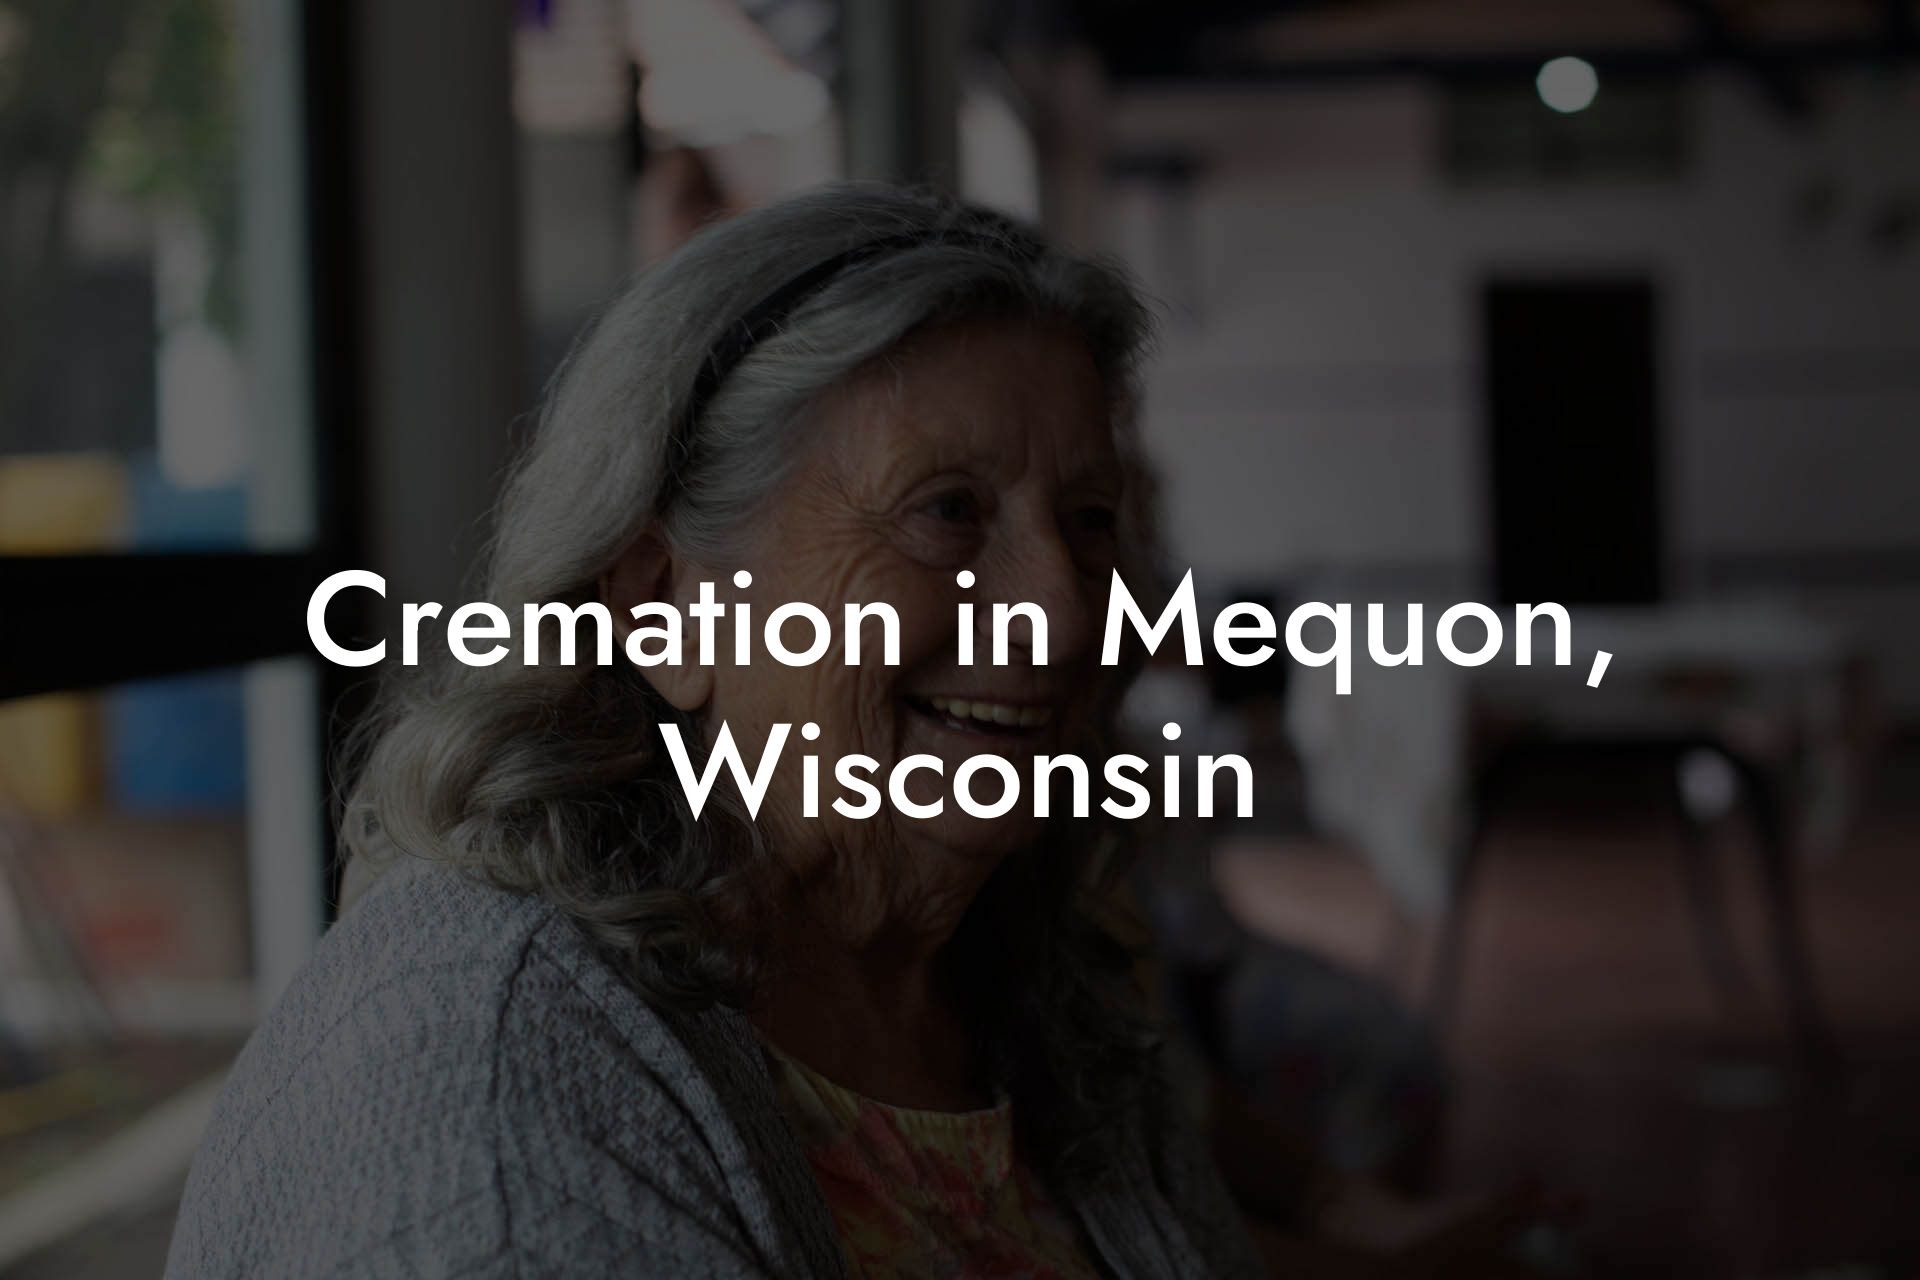 Cremation in Mequon, Wisconsin